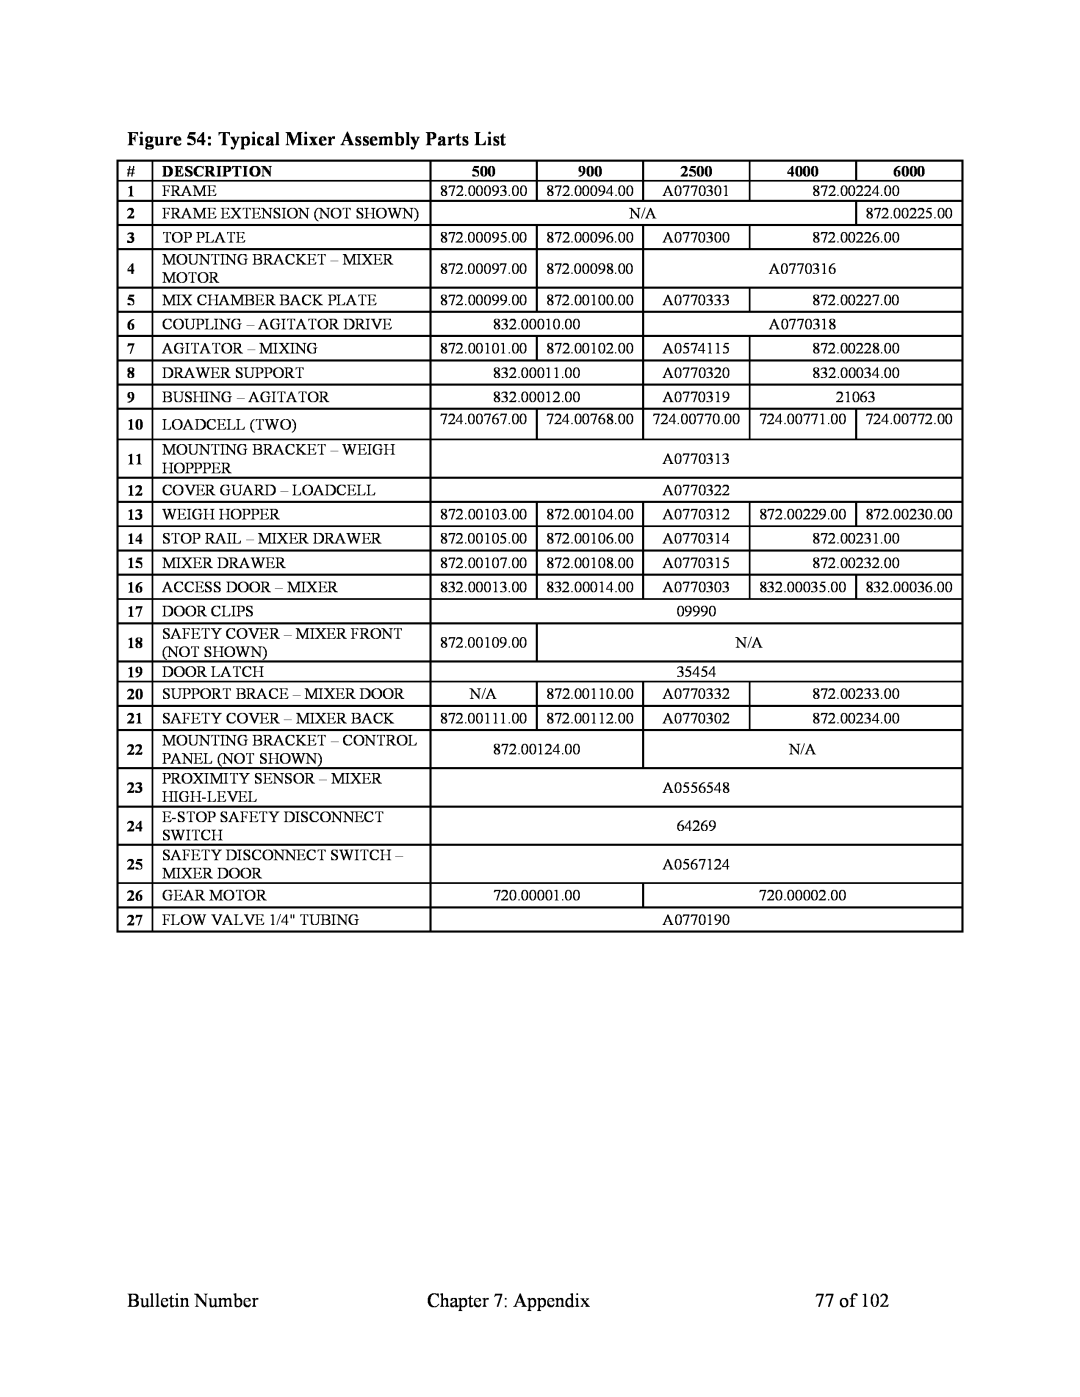 Mitsubishi Electronics 882.00207.00 specifications Typical Mixer Assembly Parts List, Bulletin Number, Appendix, 77 of 